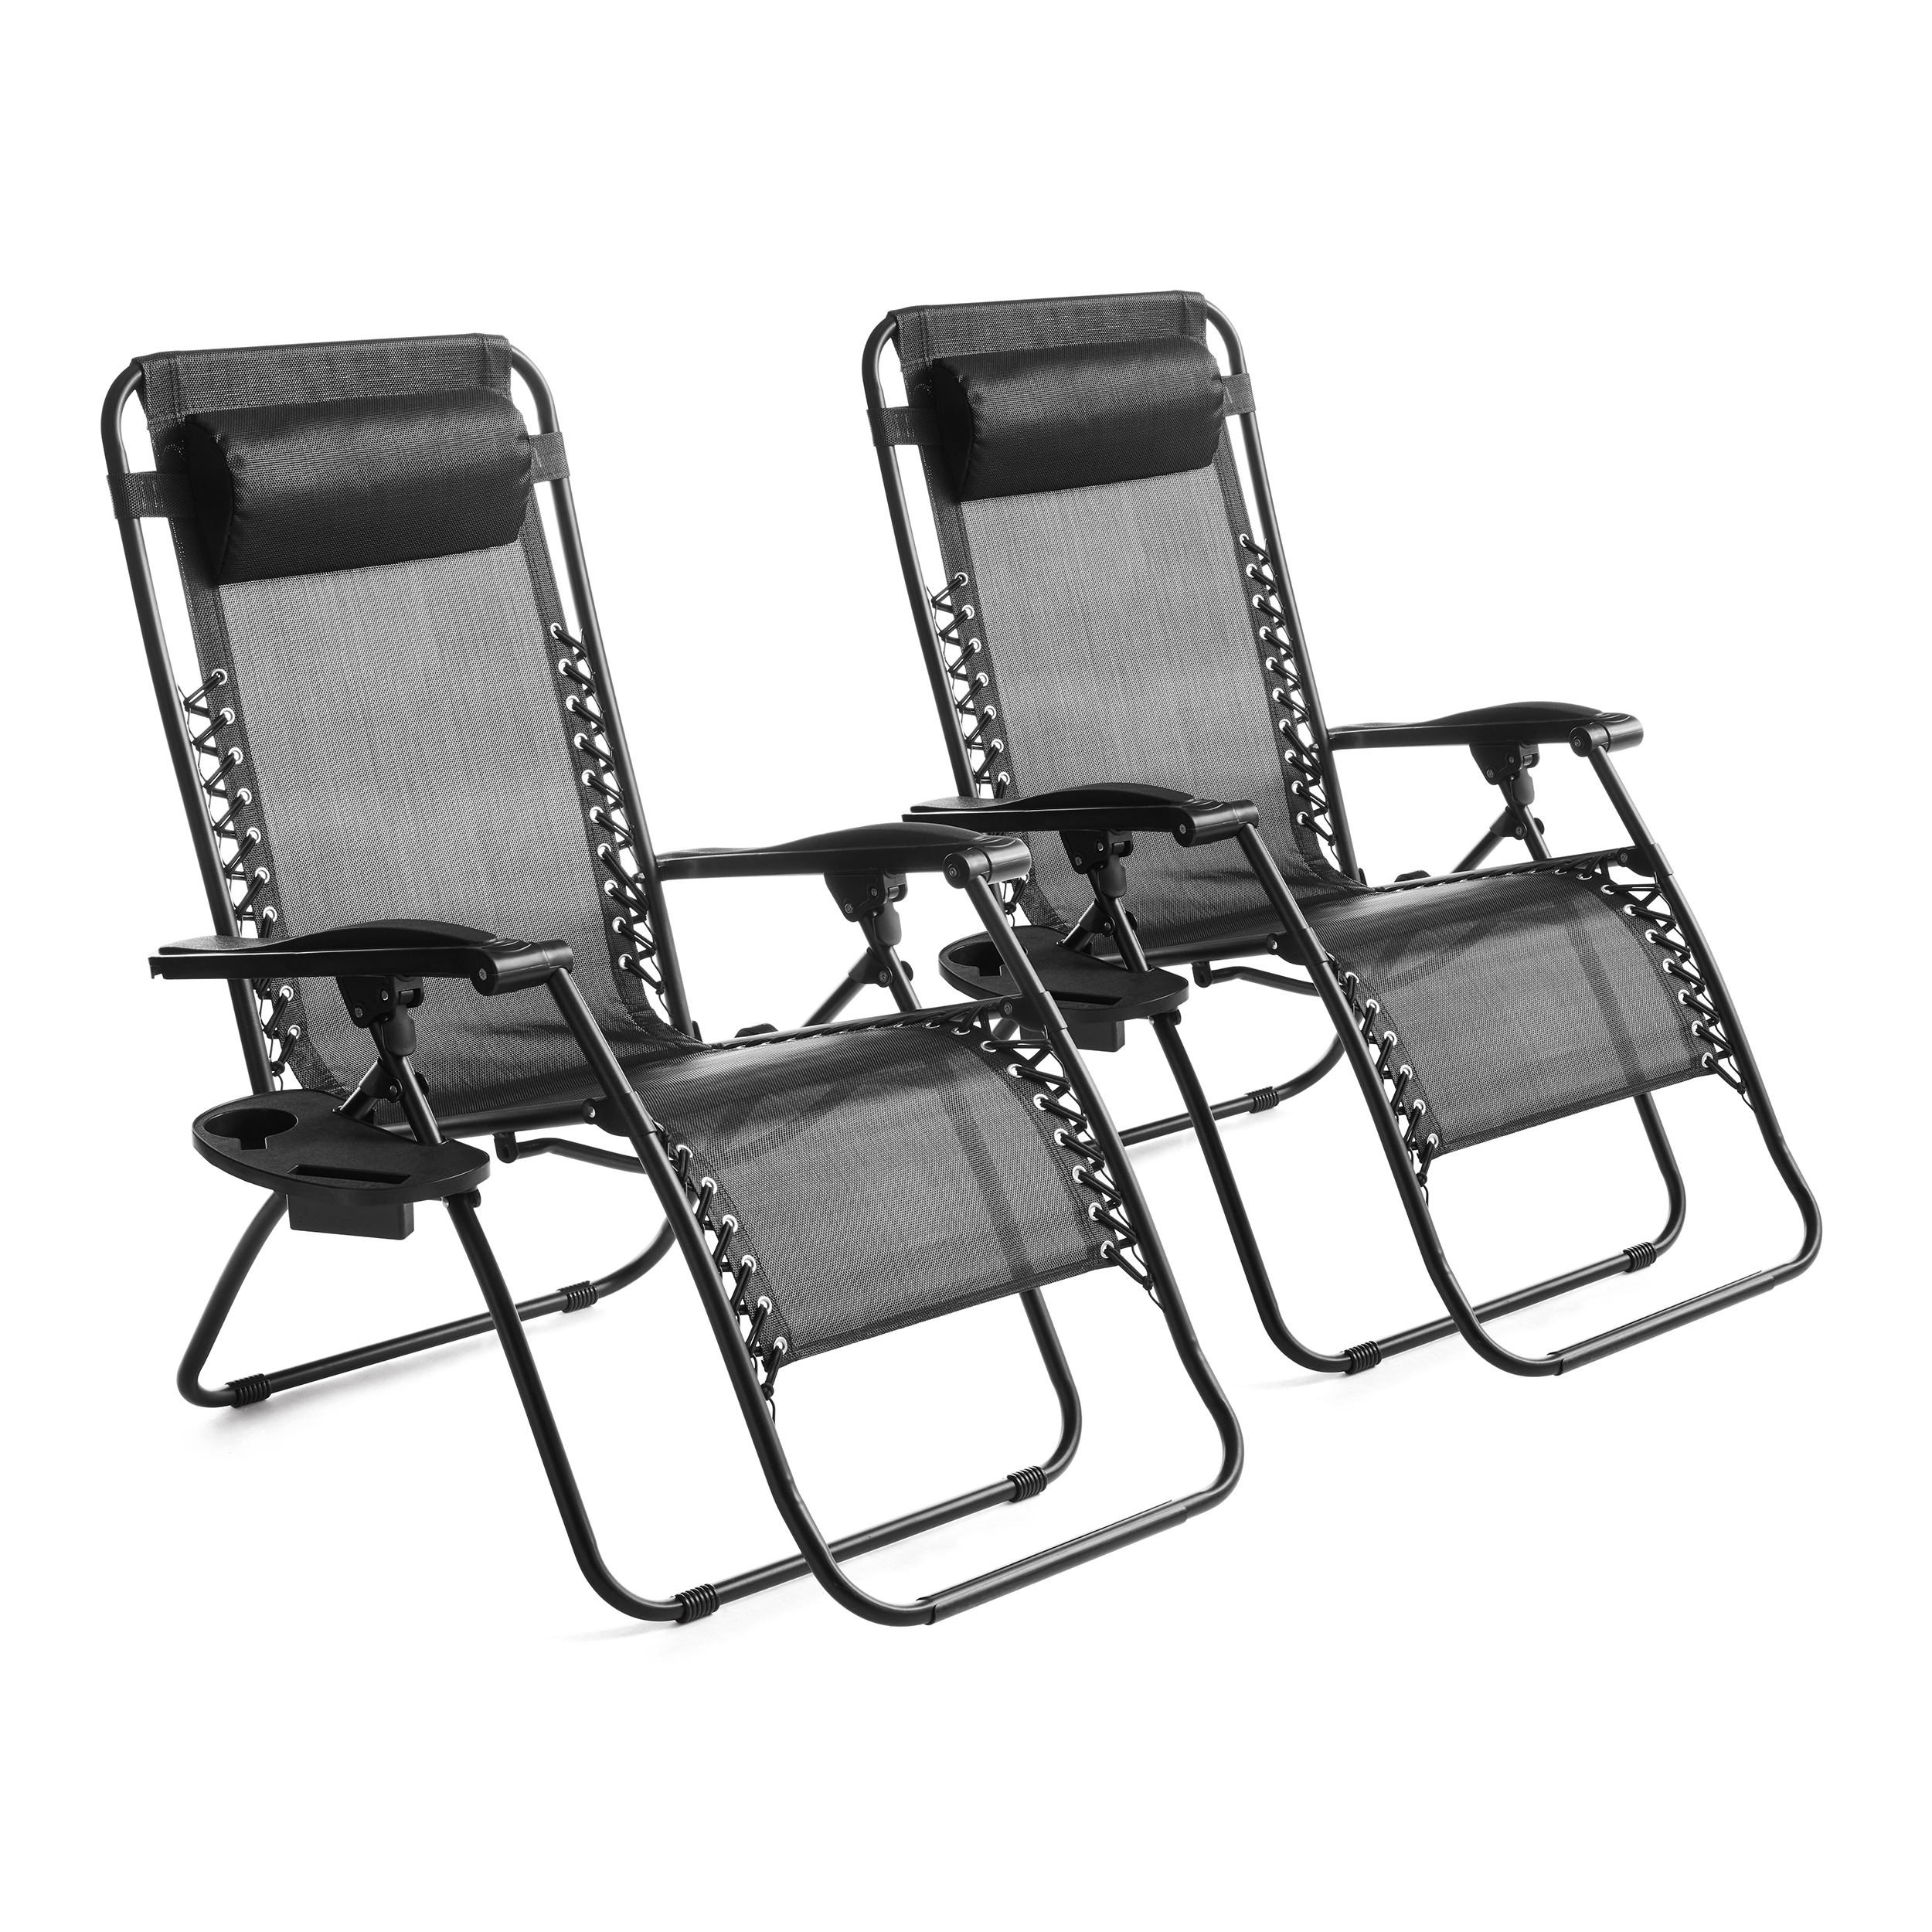 Mainstays Zero Gravity Chair Lounger, 2 Pack - Black - image 1 of 7